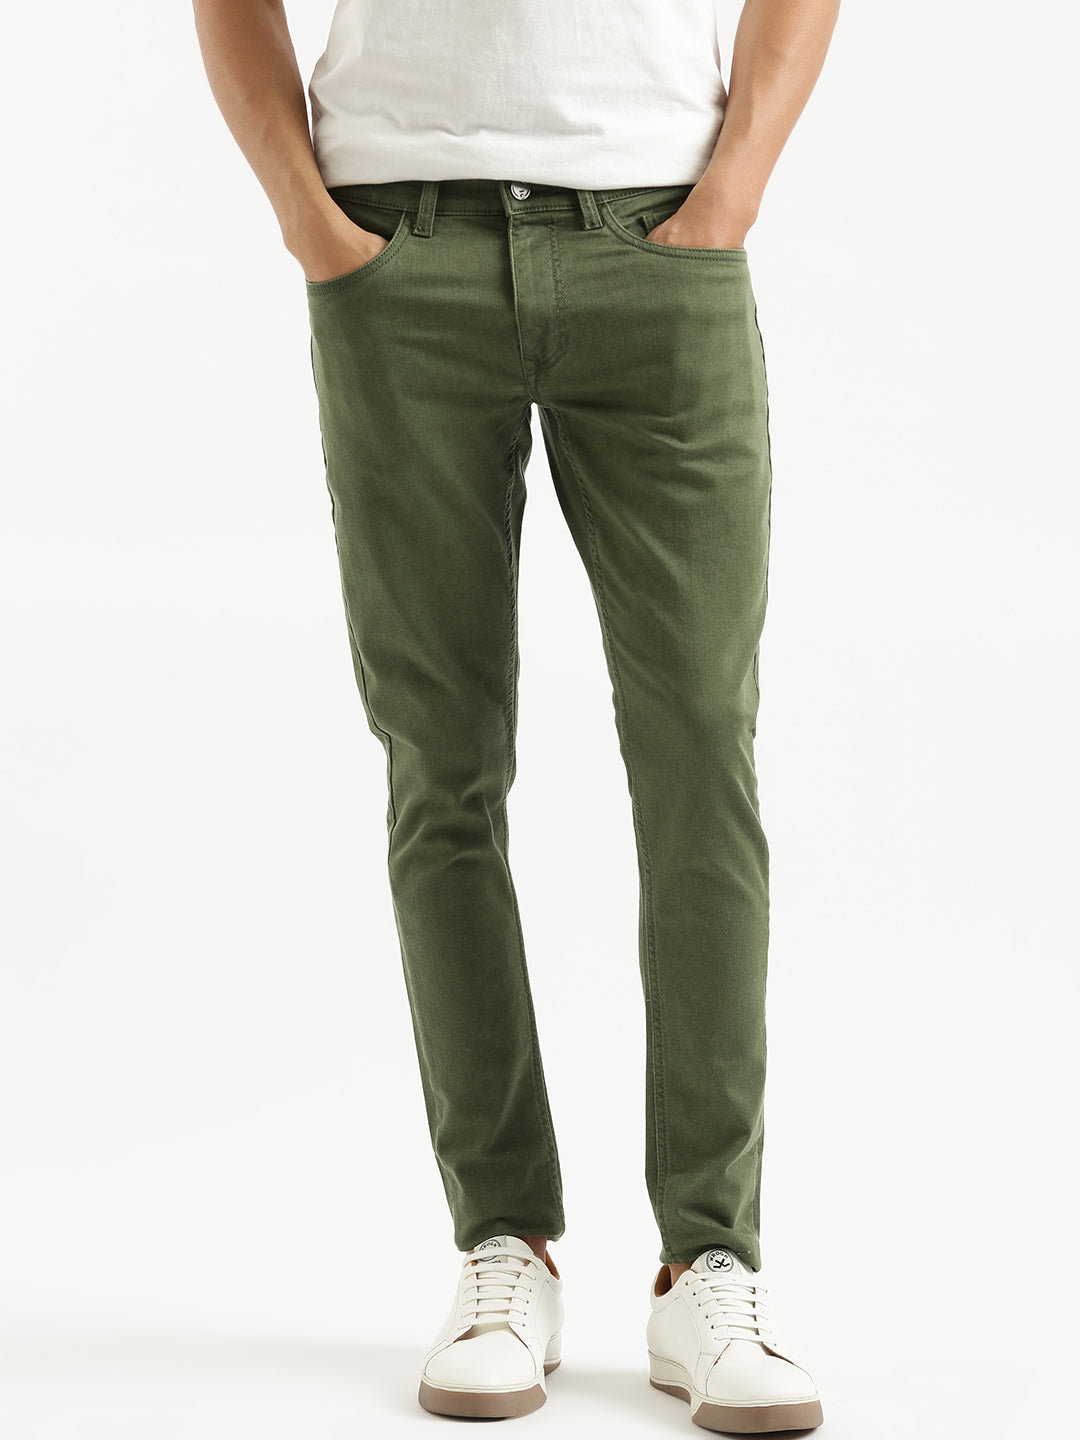 Olive Green Classic Jeans